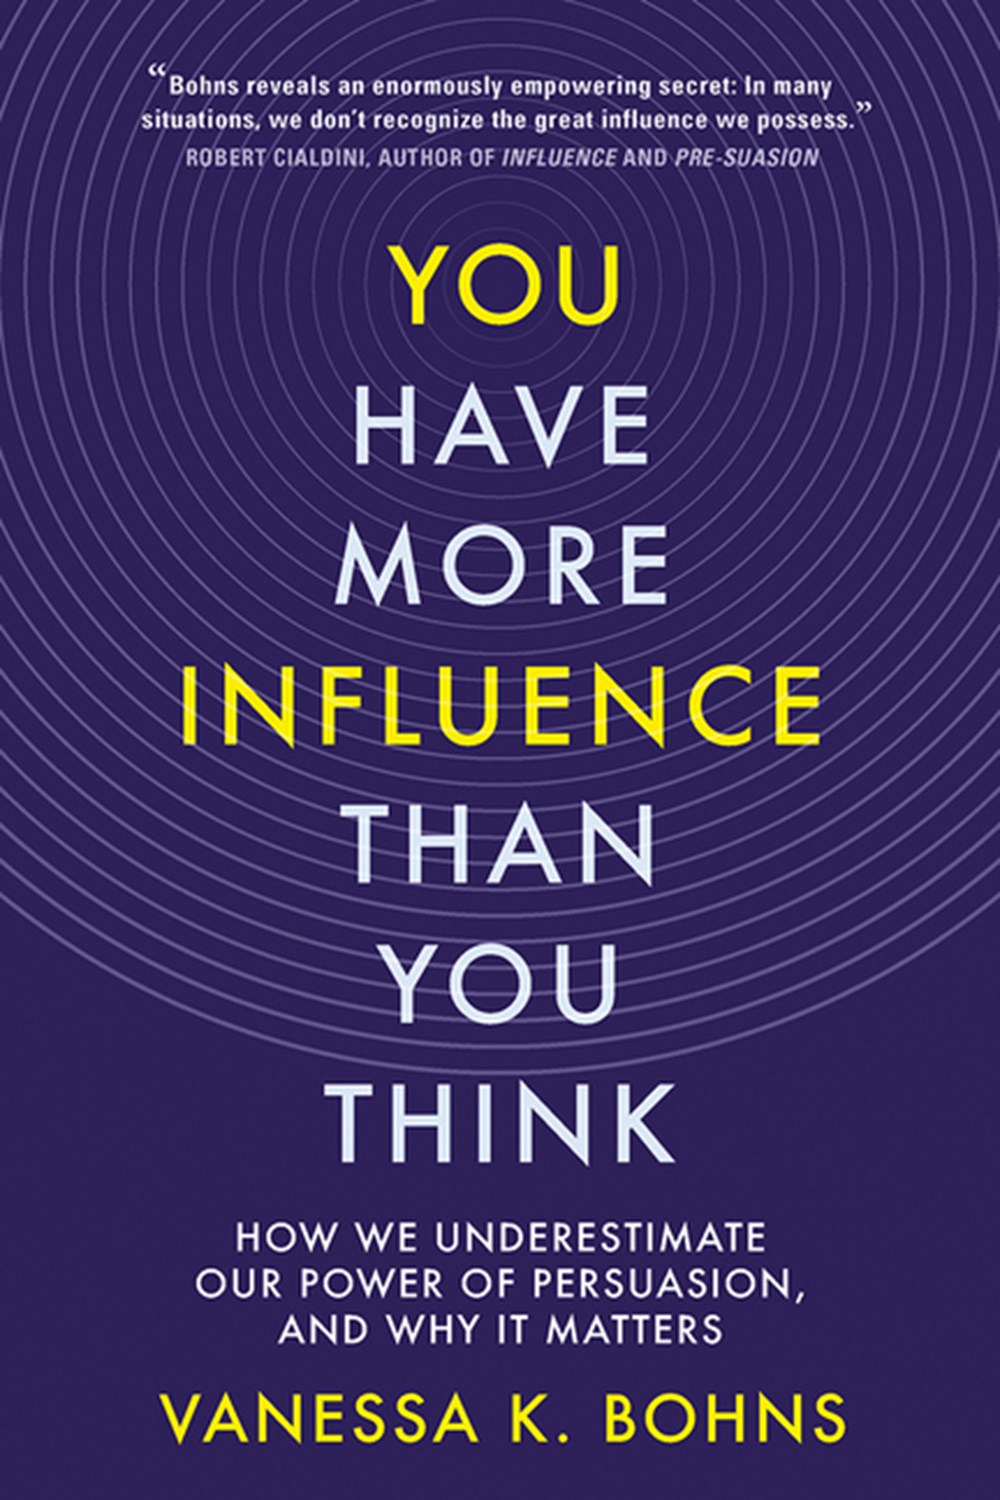 You Have More Influence Than You Think How We Underestimate Our Power of Persuasion, and Why It Matt